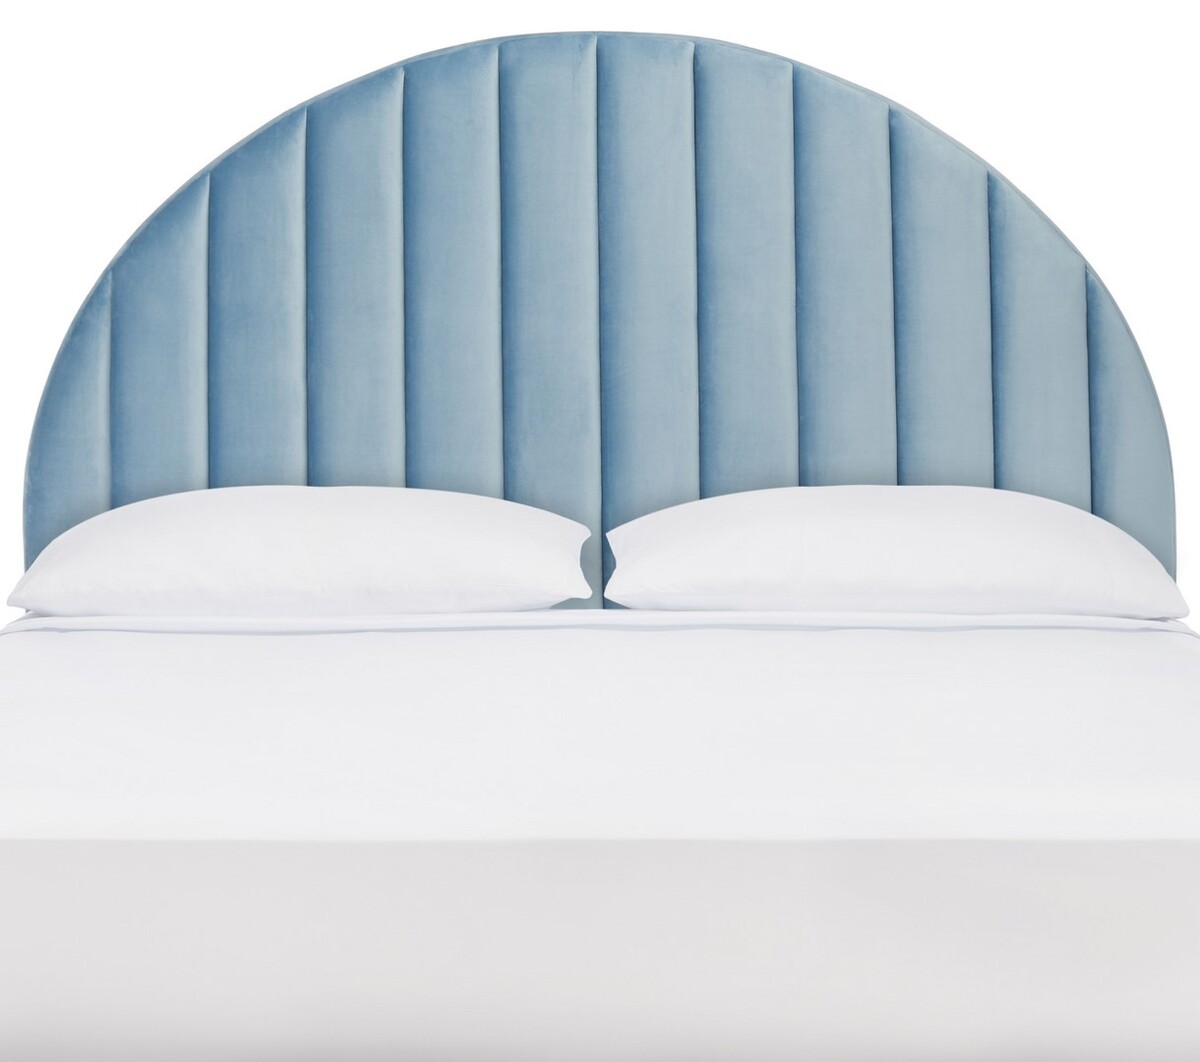 Picture of Safavieh HBD6400A-F 58 x 4 x 57 in. Solare Striped Arched Headboard - Slate Blue - Full